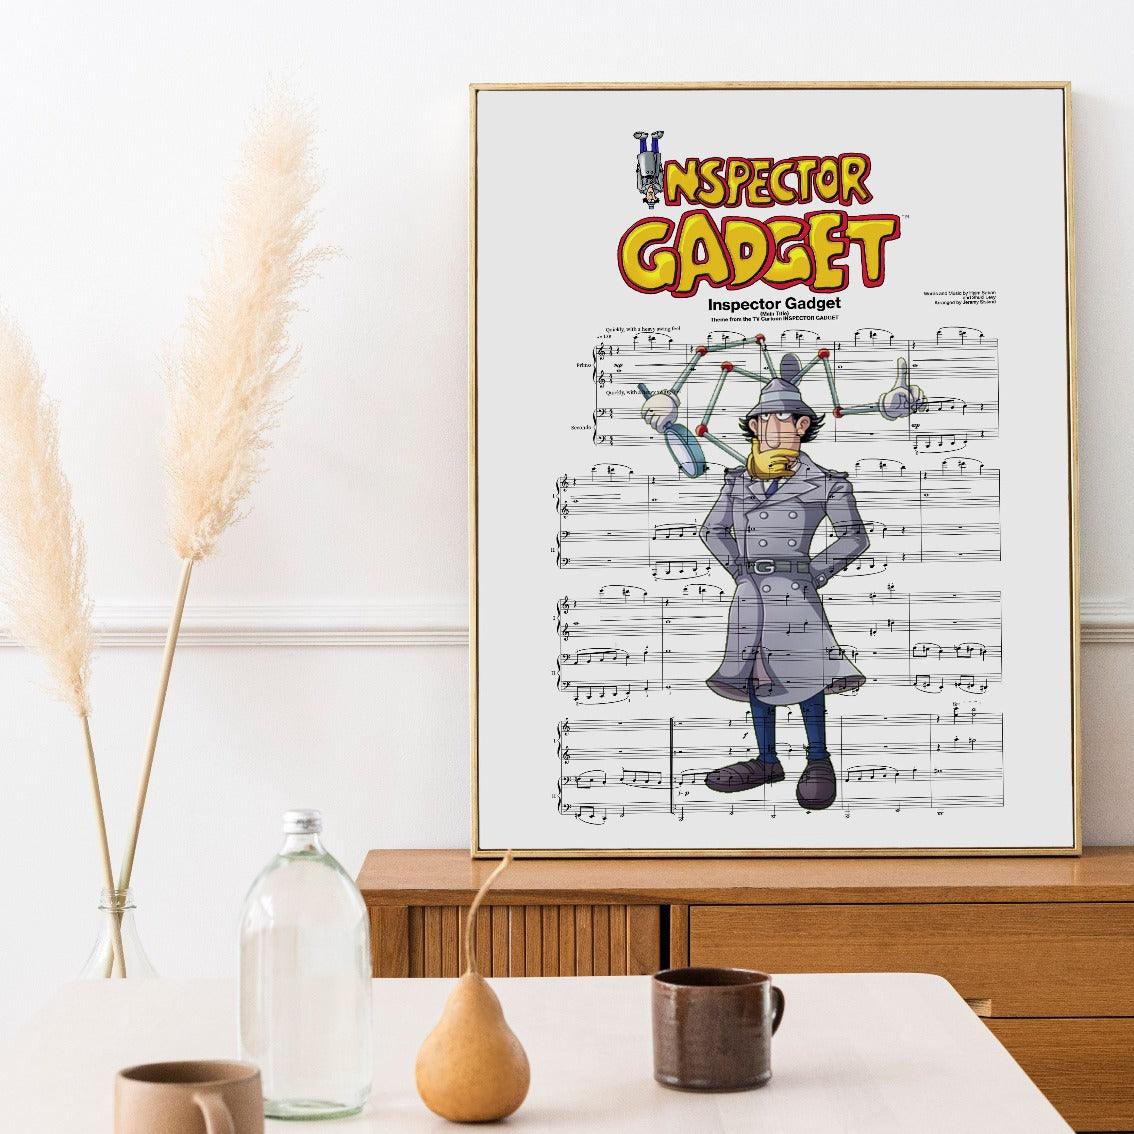 Give your walls a little personality with this fun Inspector Gadget Main Theme Poster. This poster is made with the lyrics of the song Main Title / Inspector Gadget, which is the main theme song of the Inspector Gadget TV show. Make your walls work for you with this fun and unique poster.